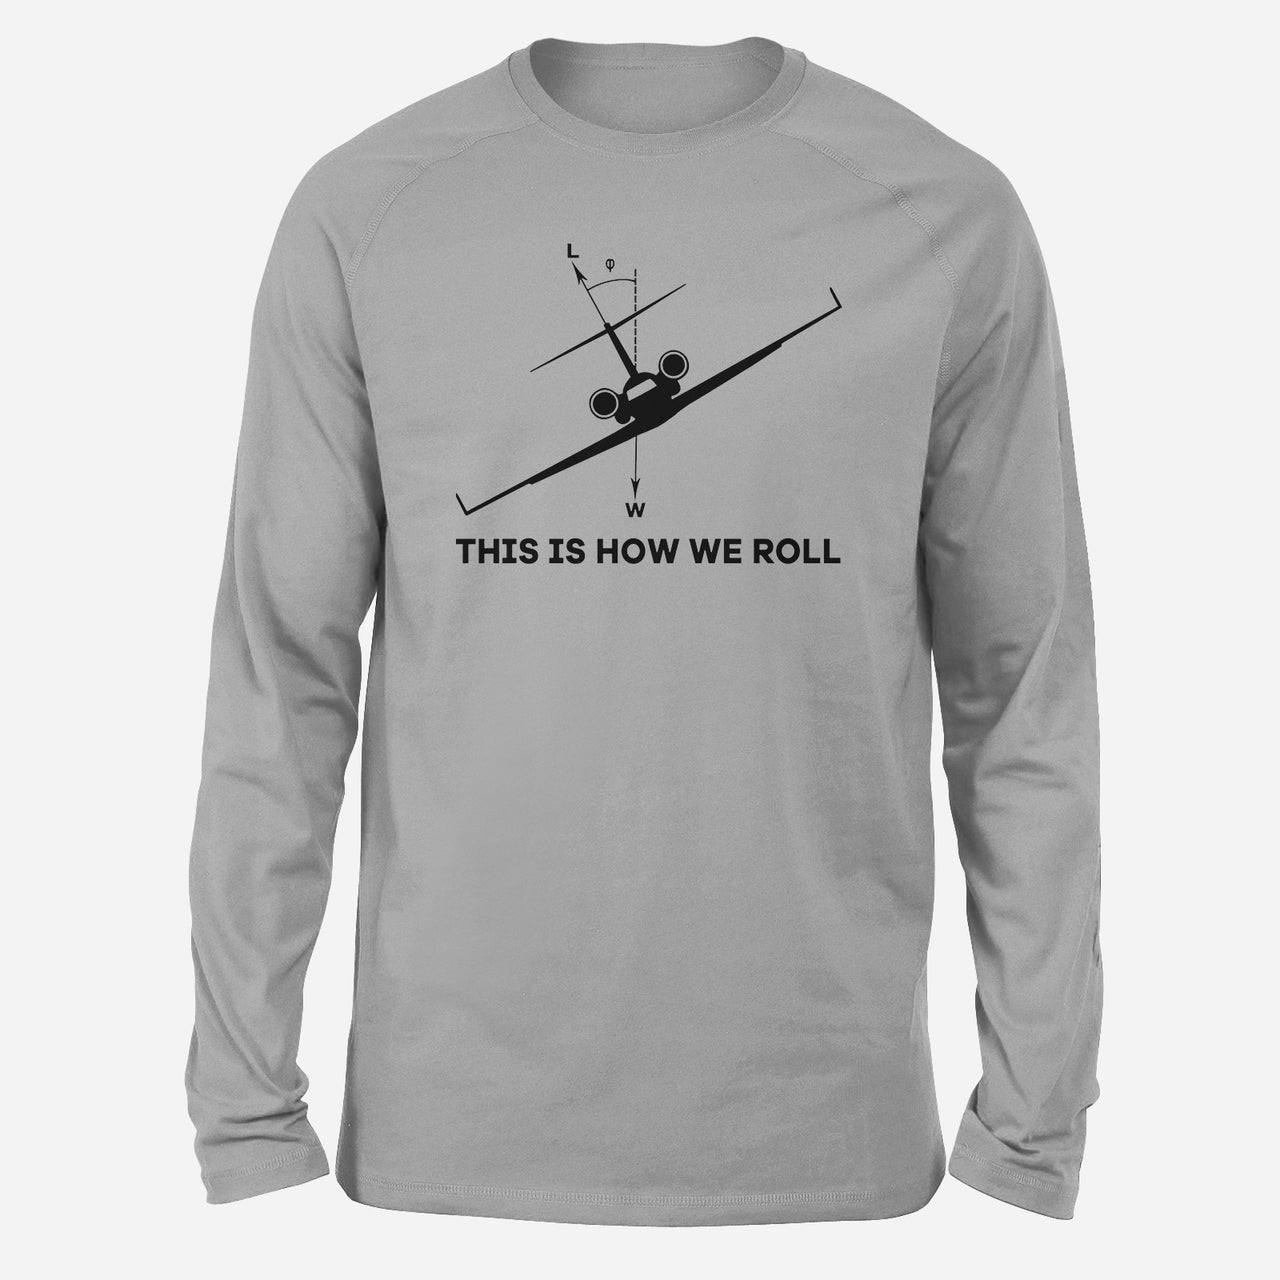 This is How We Roll Designed Long-Sleeve T-Shirts